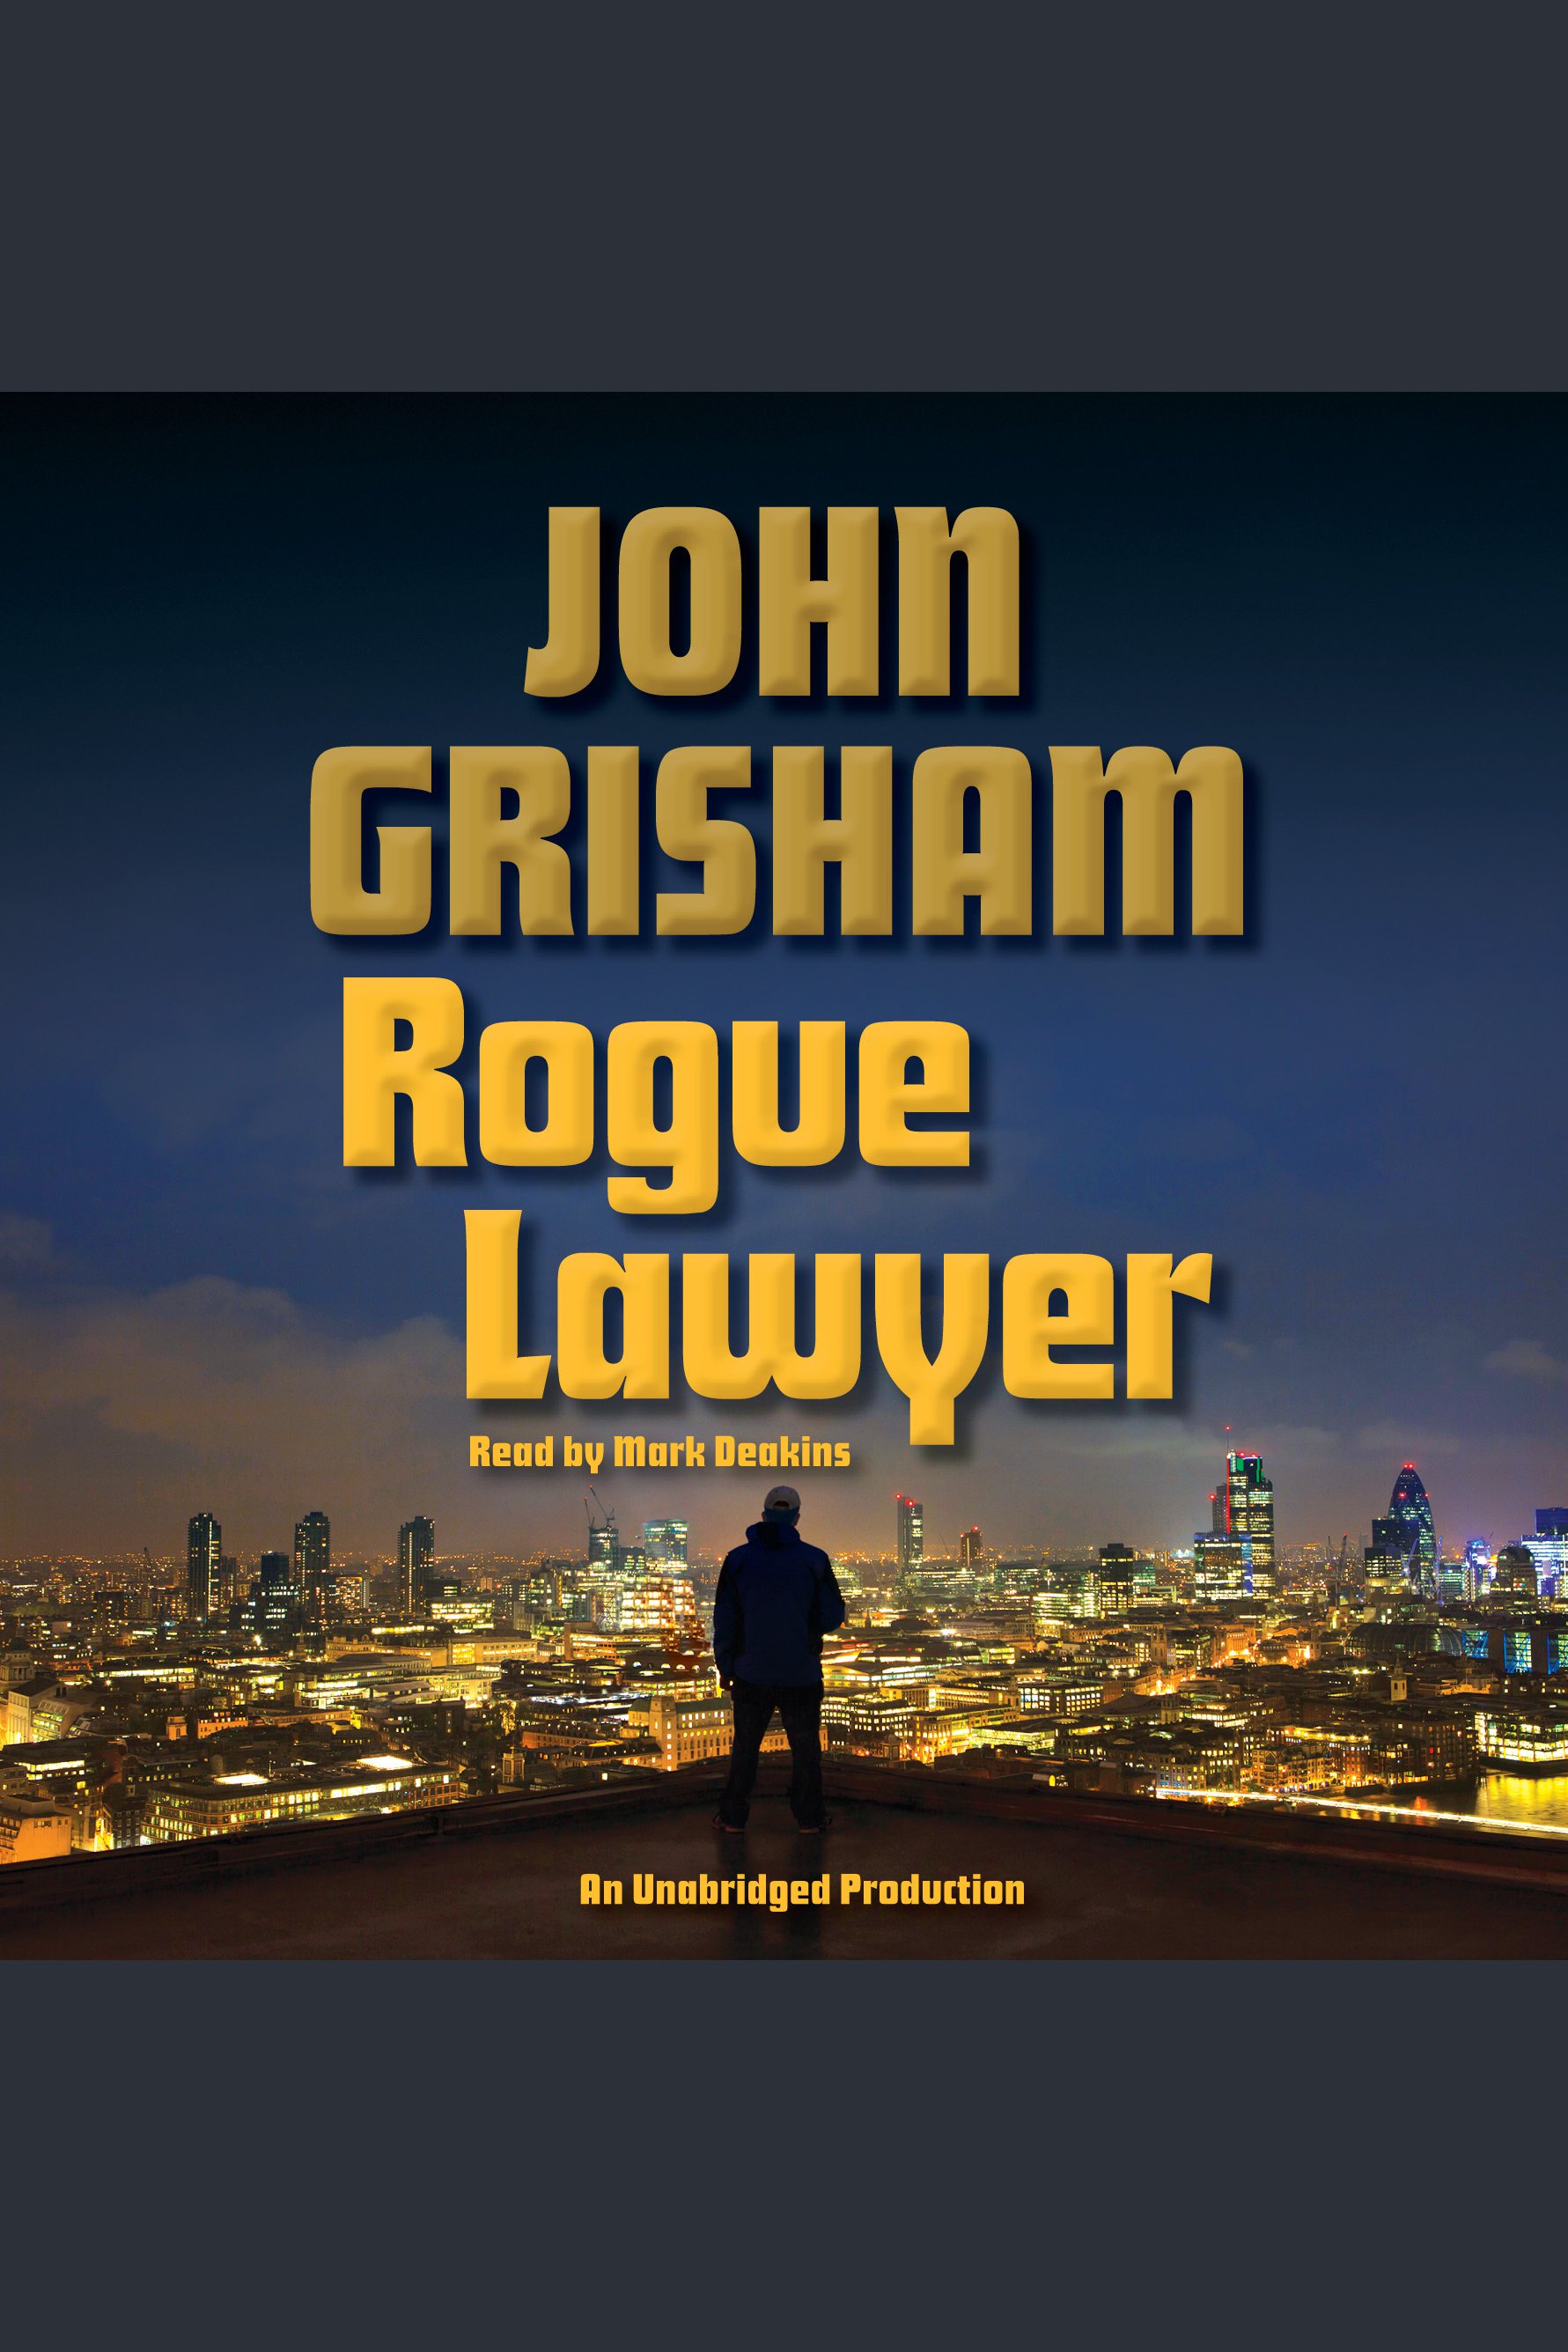 Rogue lawyer cover image